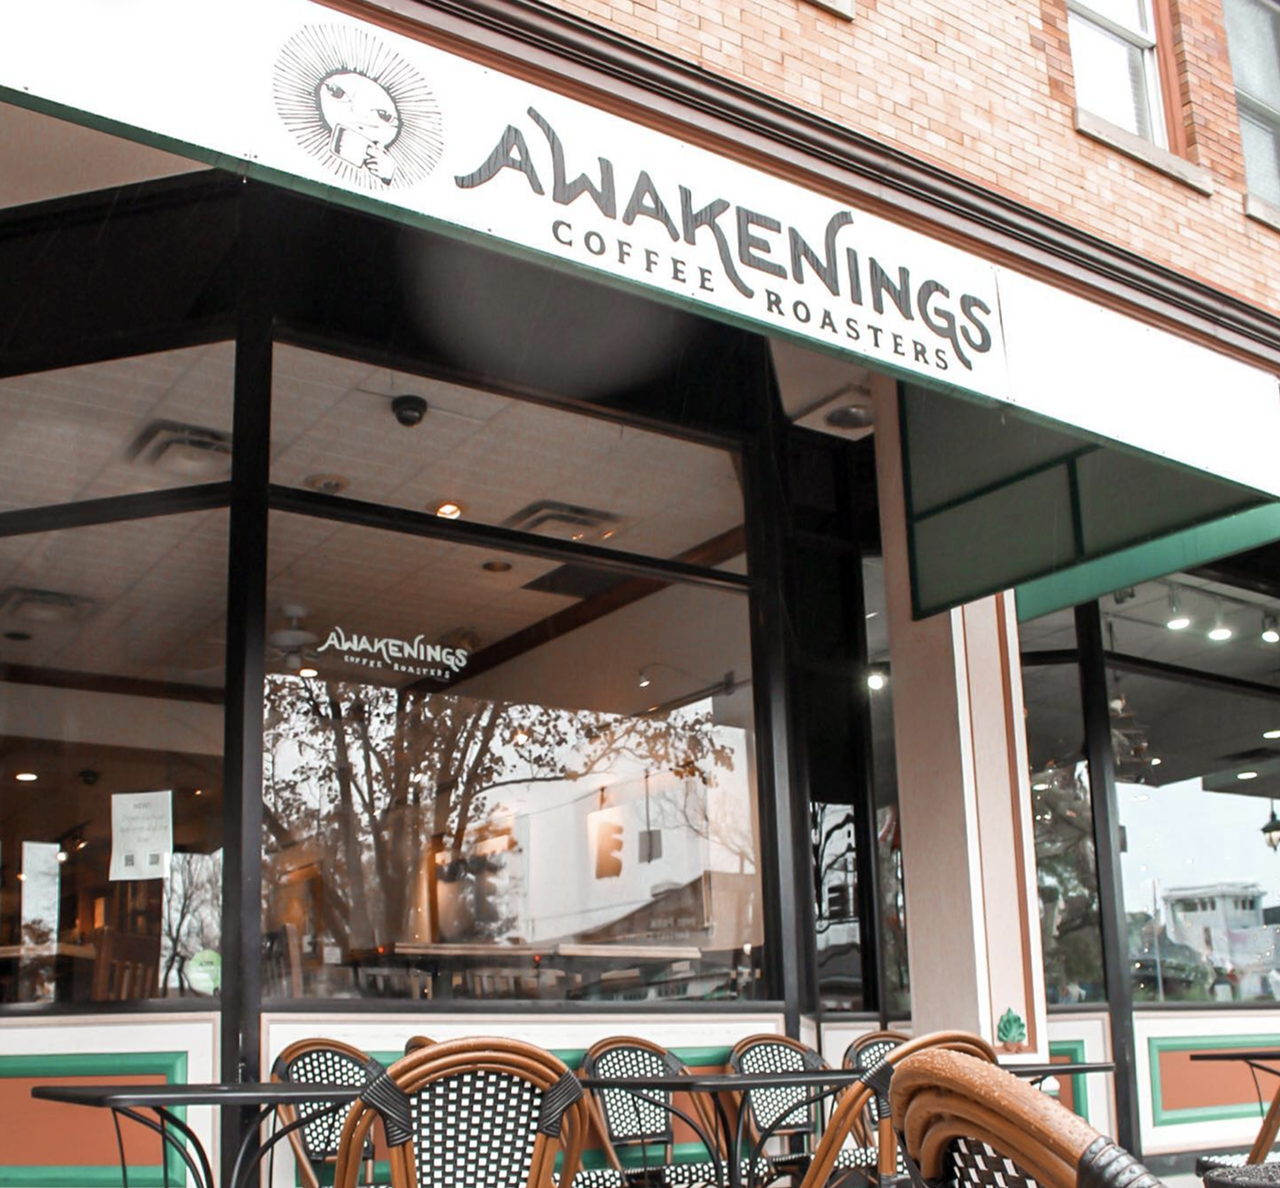 Awakenings Coffee and Wine
2734 Erie Ave., Hyde Park
This Hyde Park coffee and wine spot sources its roasts locally and focuses on serving its customers fresh, high-quality ingredients. They offer freshly ground drip coffee plus unique signature drinks created by their baristas. The wine shop has a massive selection, with access to 4,000 different wines. There is a $10 corking fee if you want to stay and have a bottle.